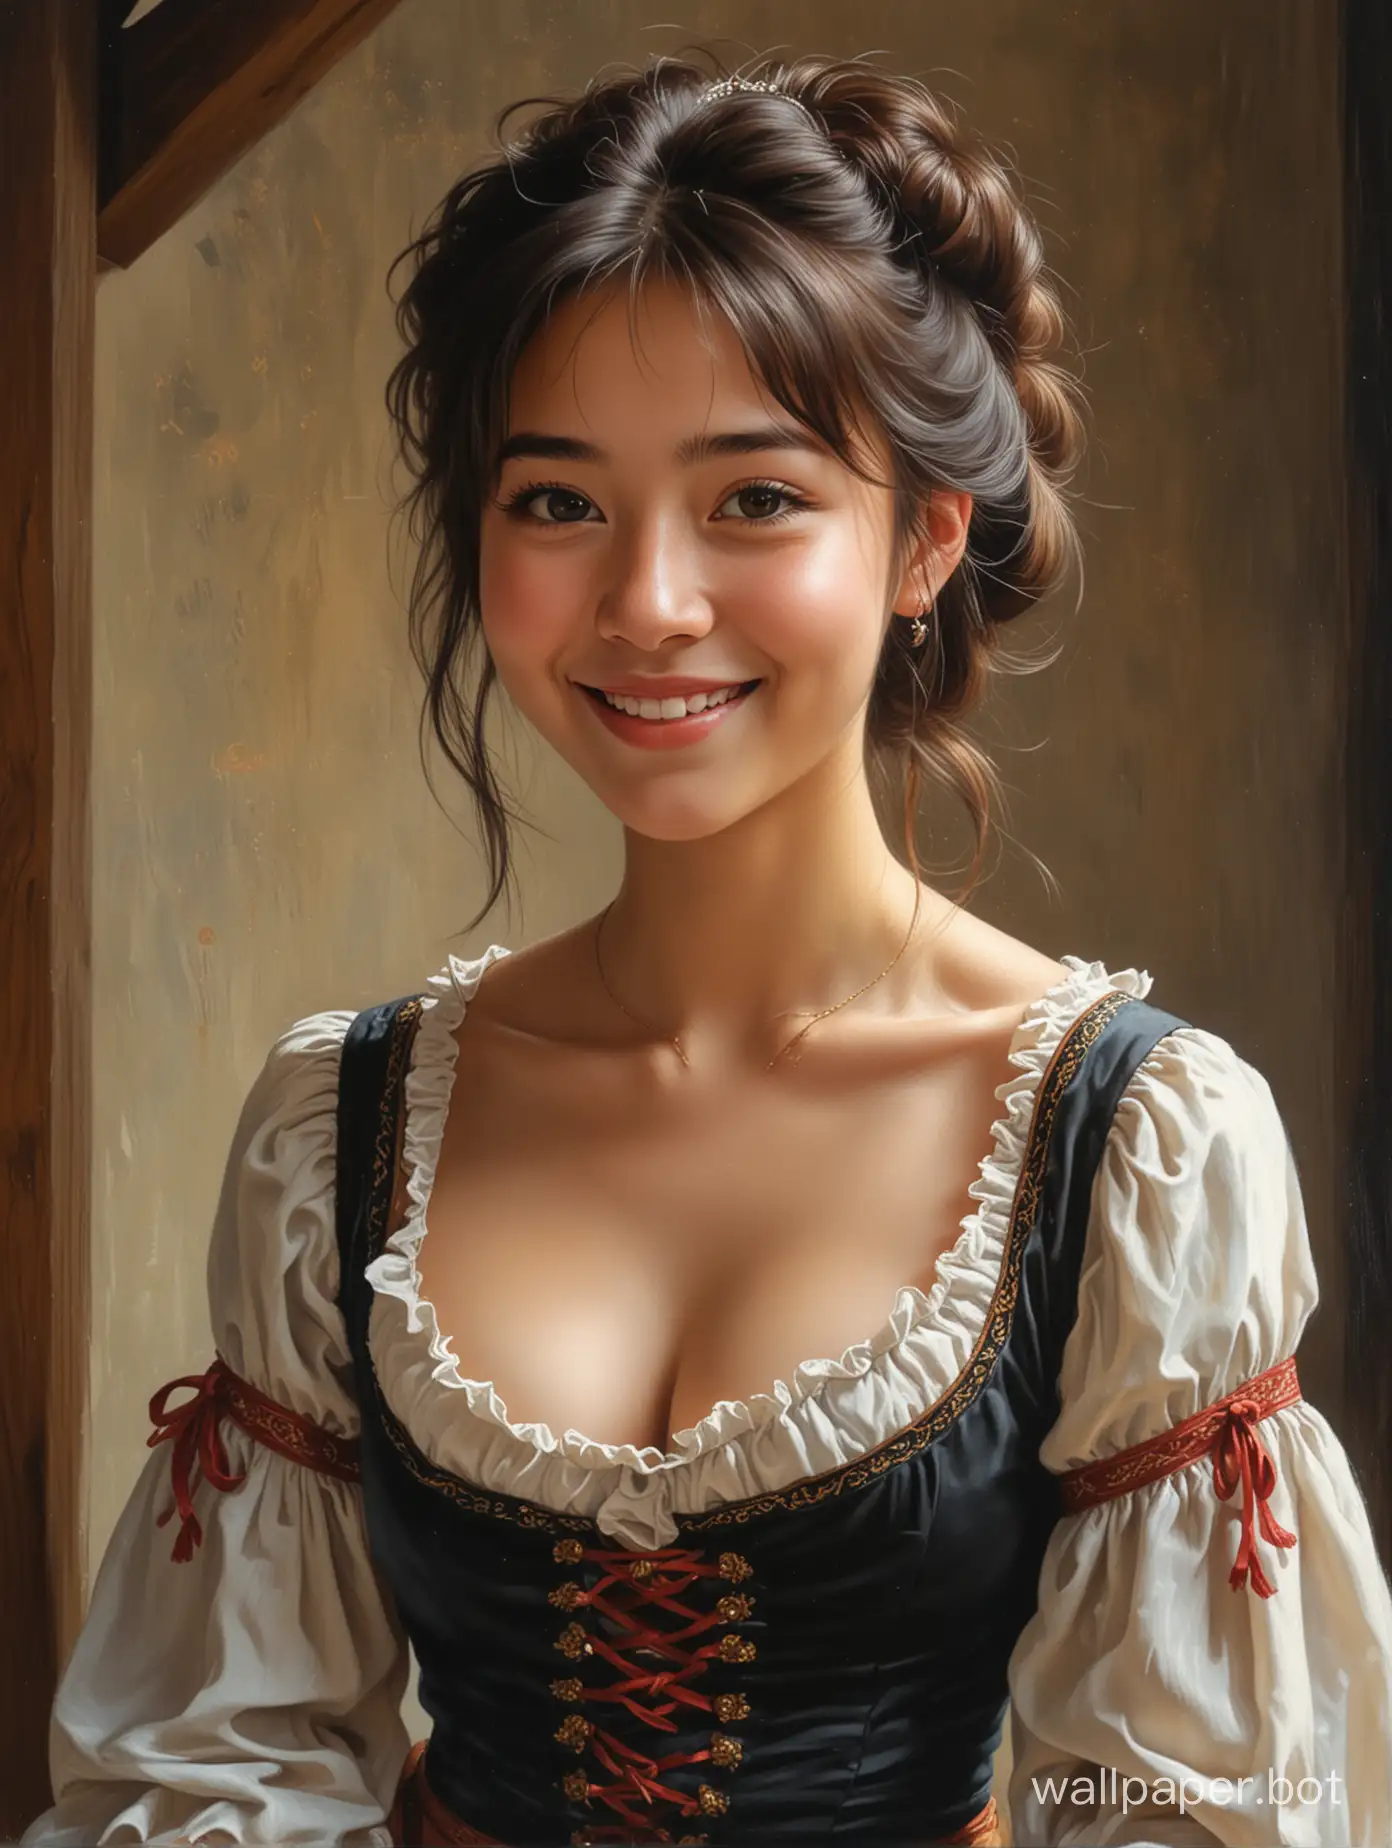 Innocent-Kazakh-Teen-Girl-with-Amber-Eyes-and-80s-Style-Hair-Enchanting-Smiles-in-Velazquez-Style-Painting